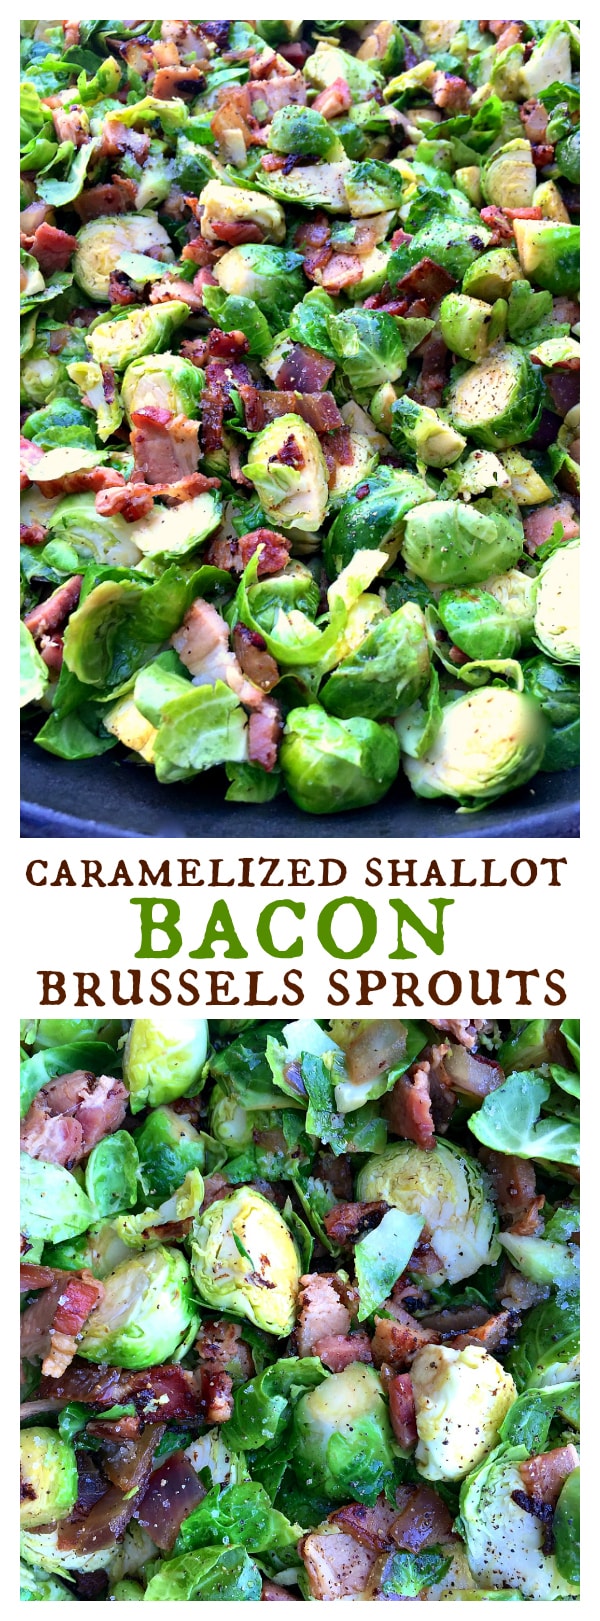 Caramelized Shallot Bacon Brussels Sprouts